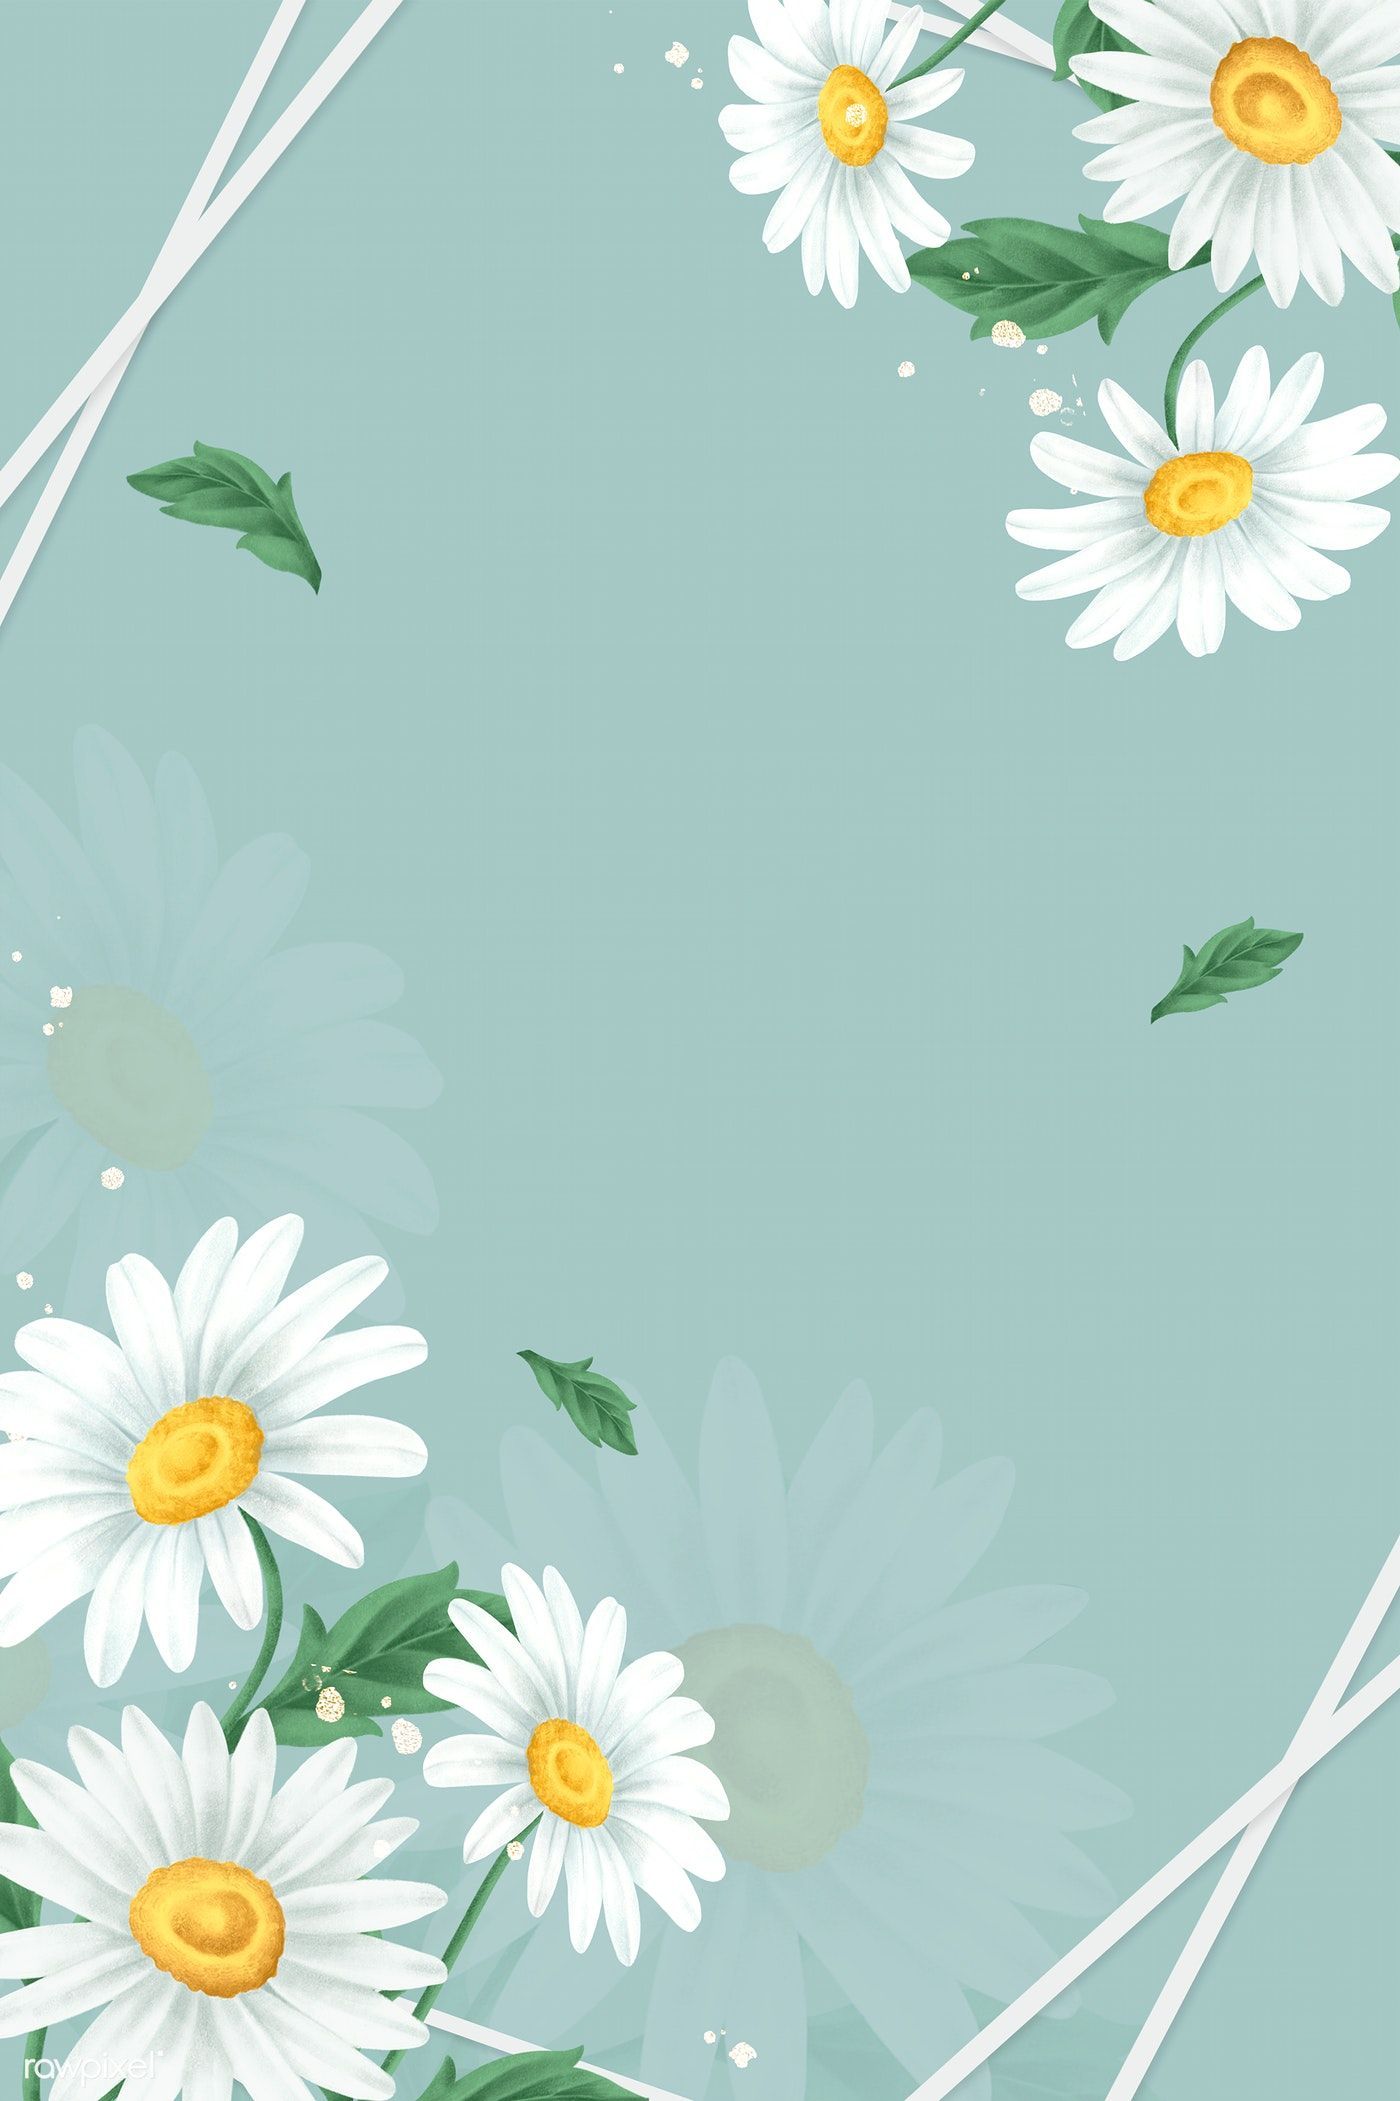 Download premium vector of Daisy flowers on a blue background - Daisy